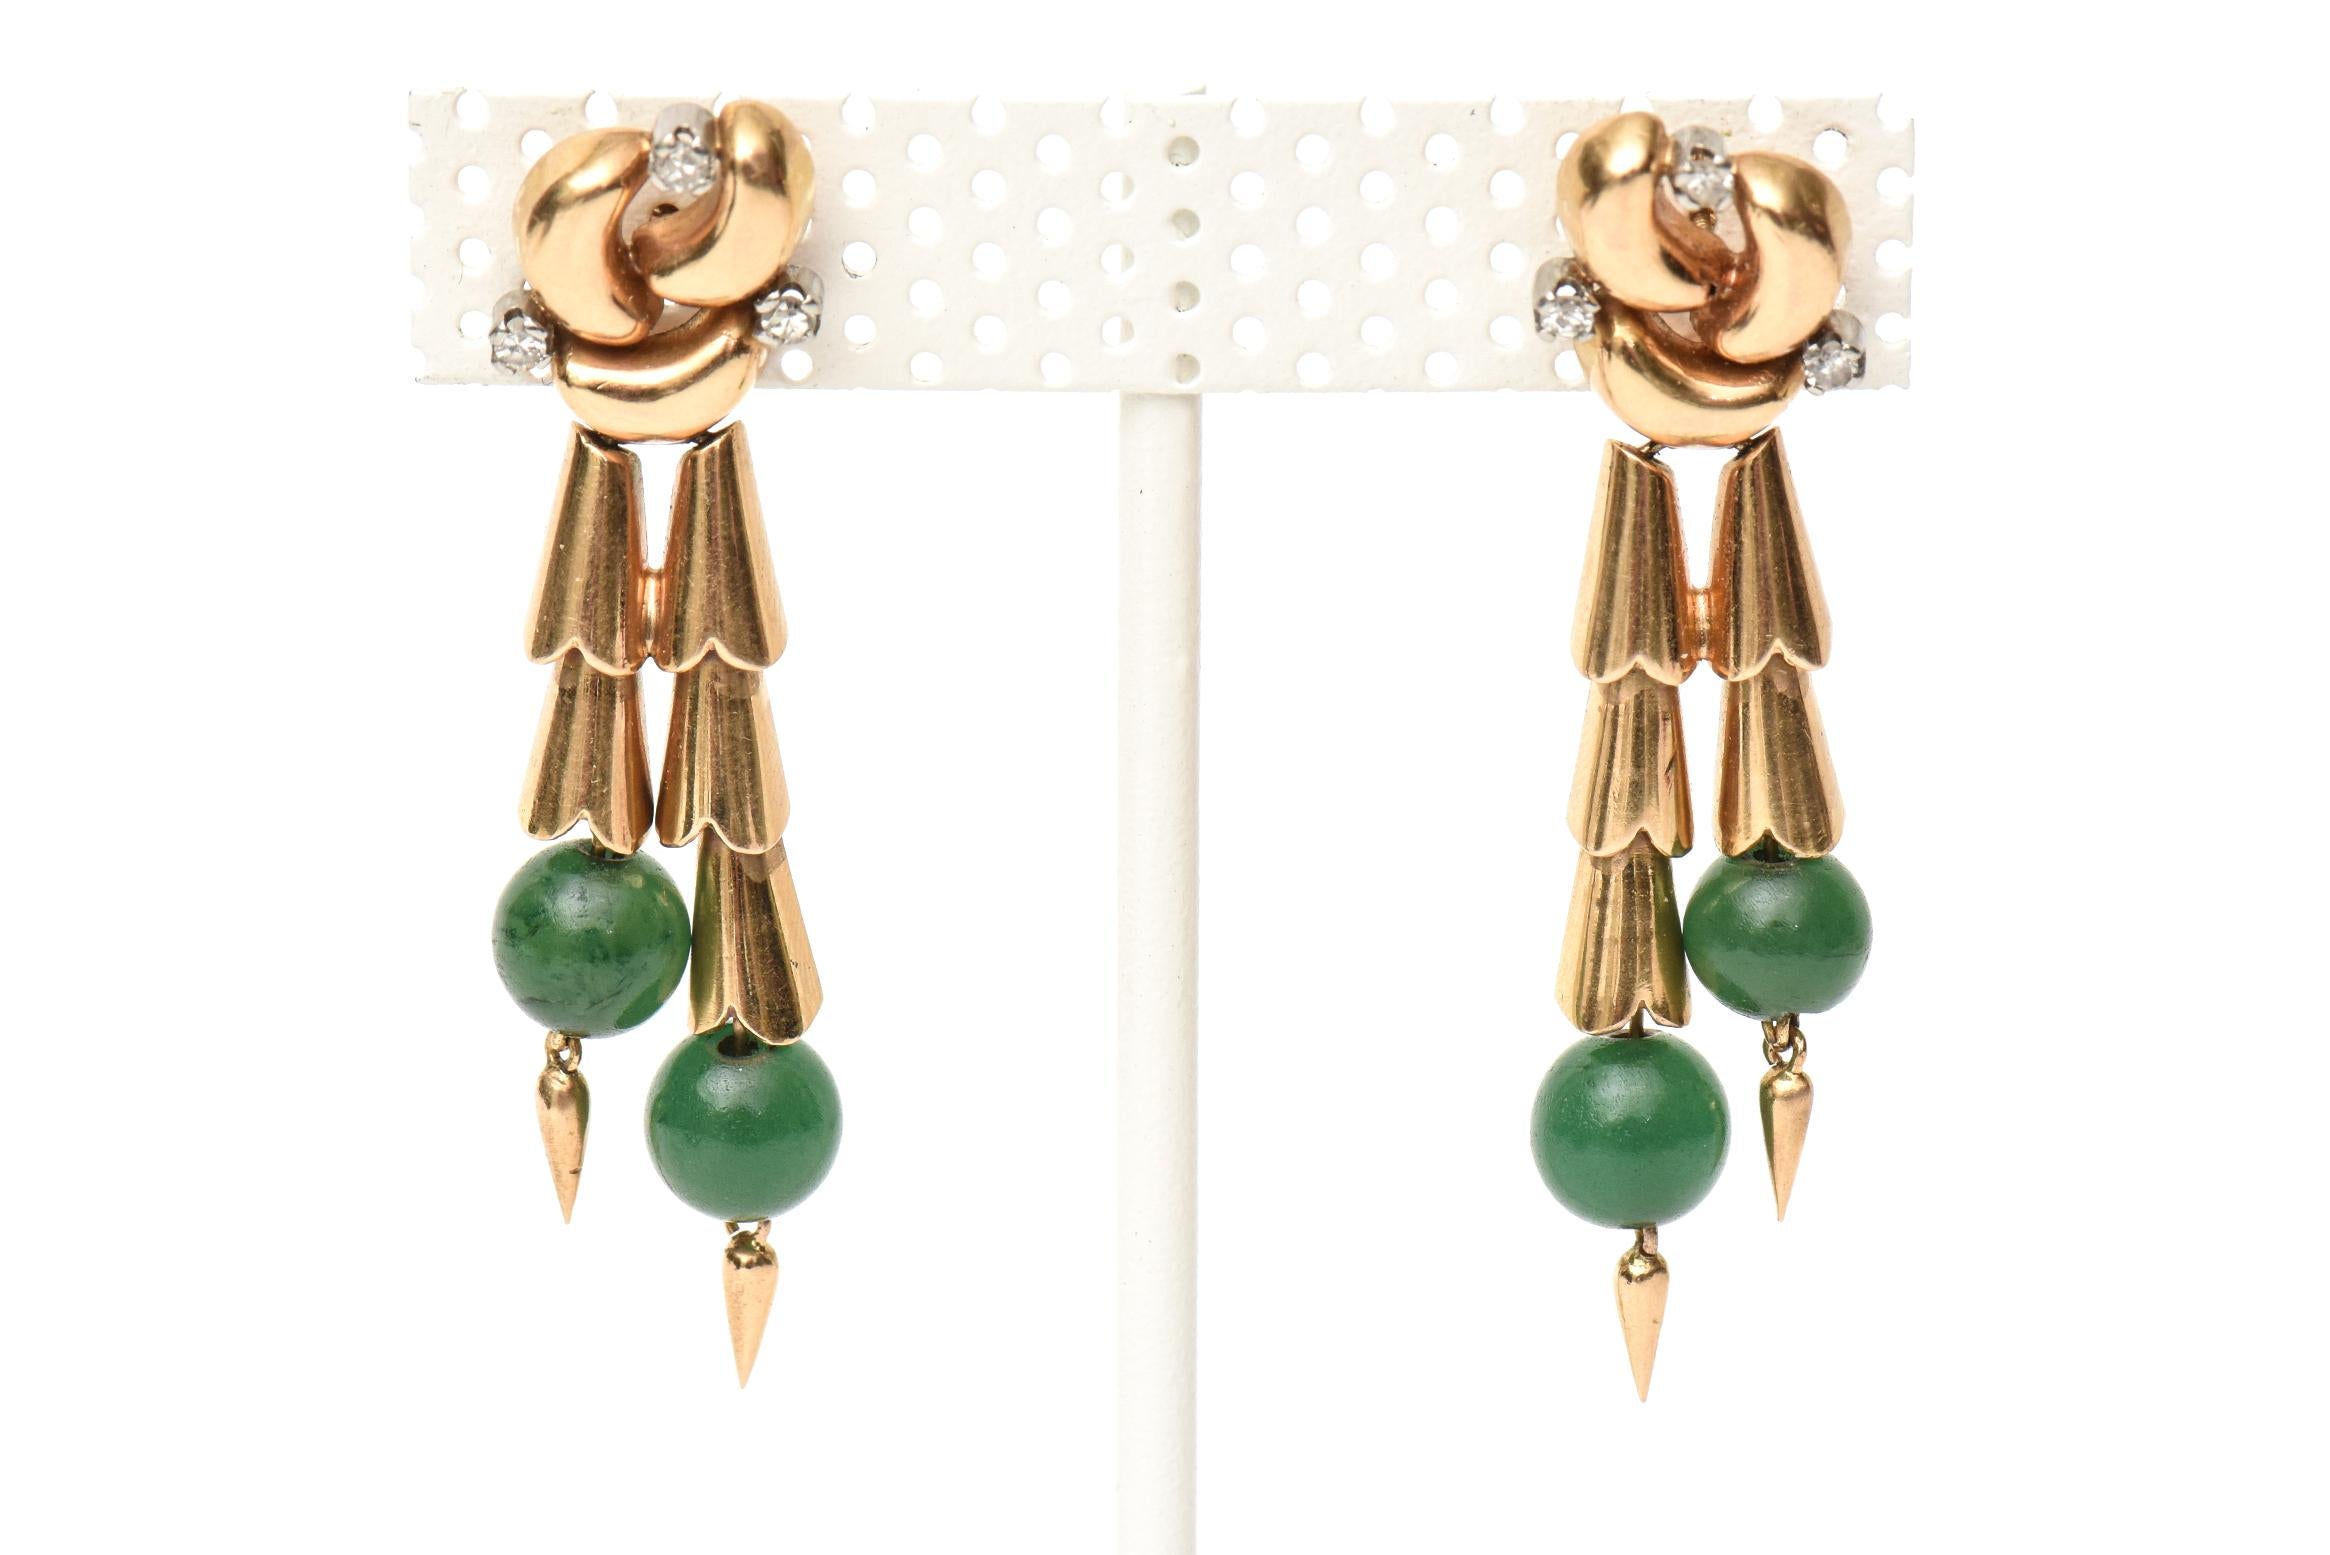 These stunning pair of retro 1940's style pair of pierced dangle earrings are have jade balls with 14K rose gold and tiny tiny diamonds. They are elegant and one is buying these for the retro look and style. They are very chic on and go dressy to